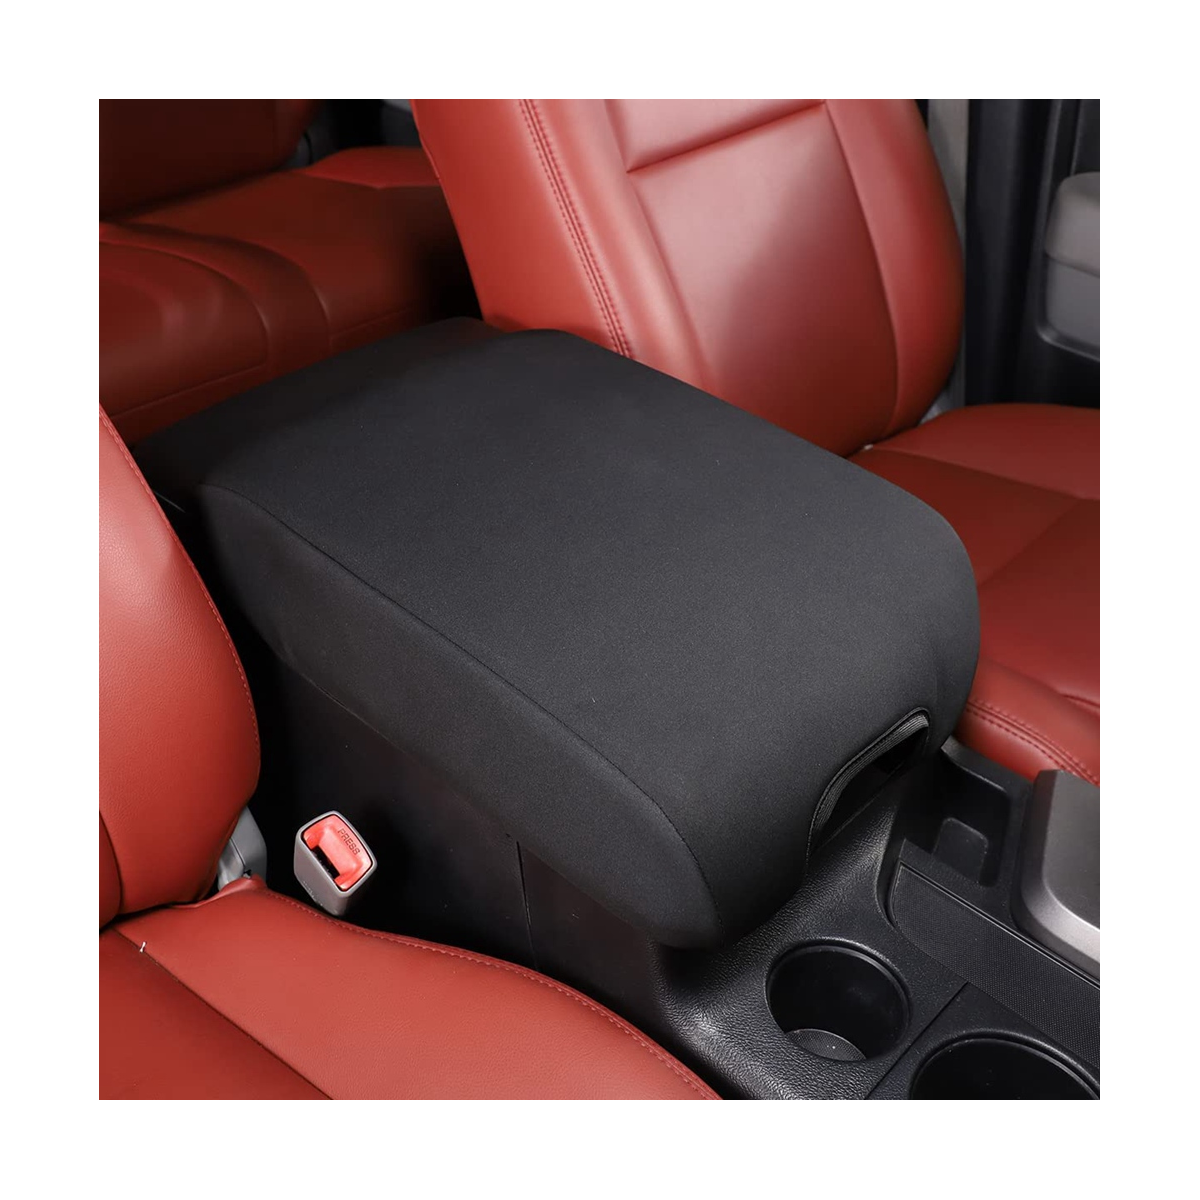 For Toyota Tundra 2007 2008 2009 2010 2011 2012 2013 Car Center Seat Armrest Box Protective Cover Accessories - Black